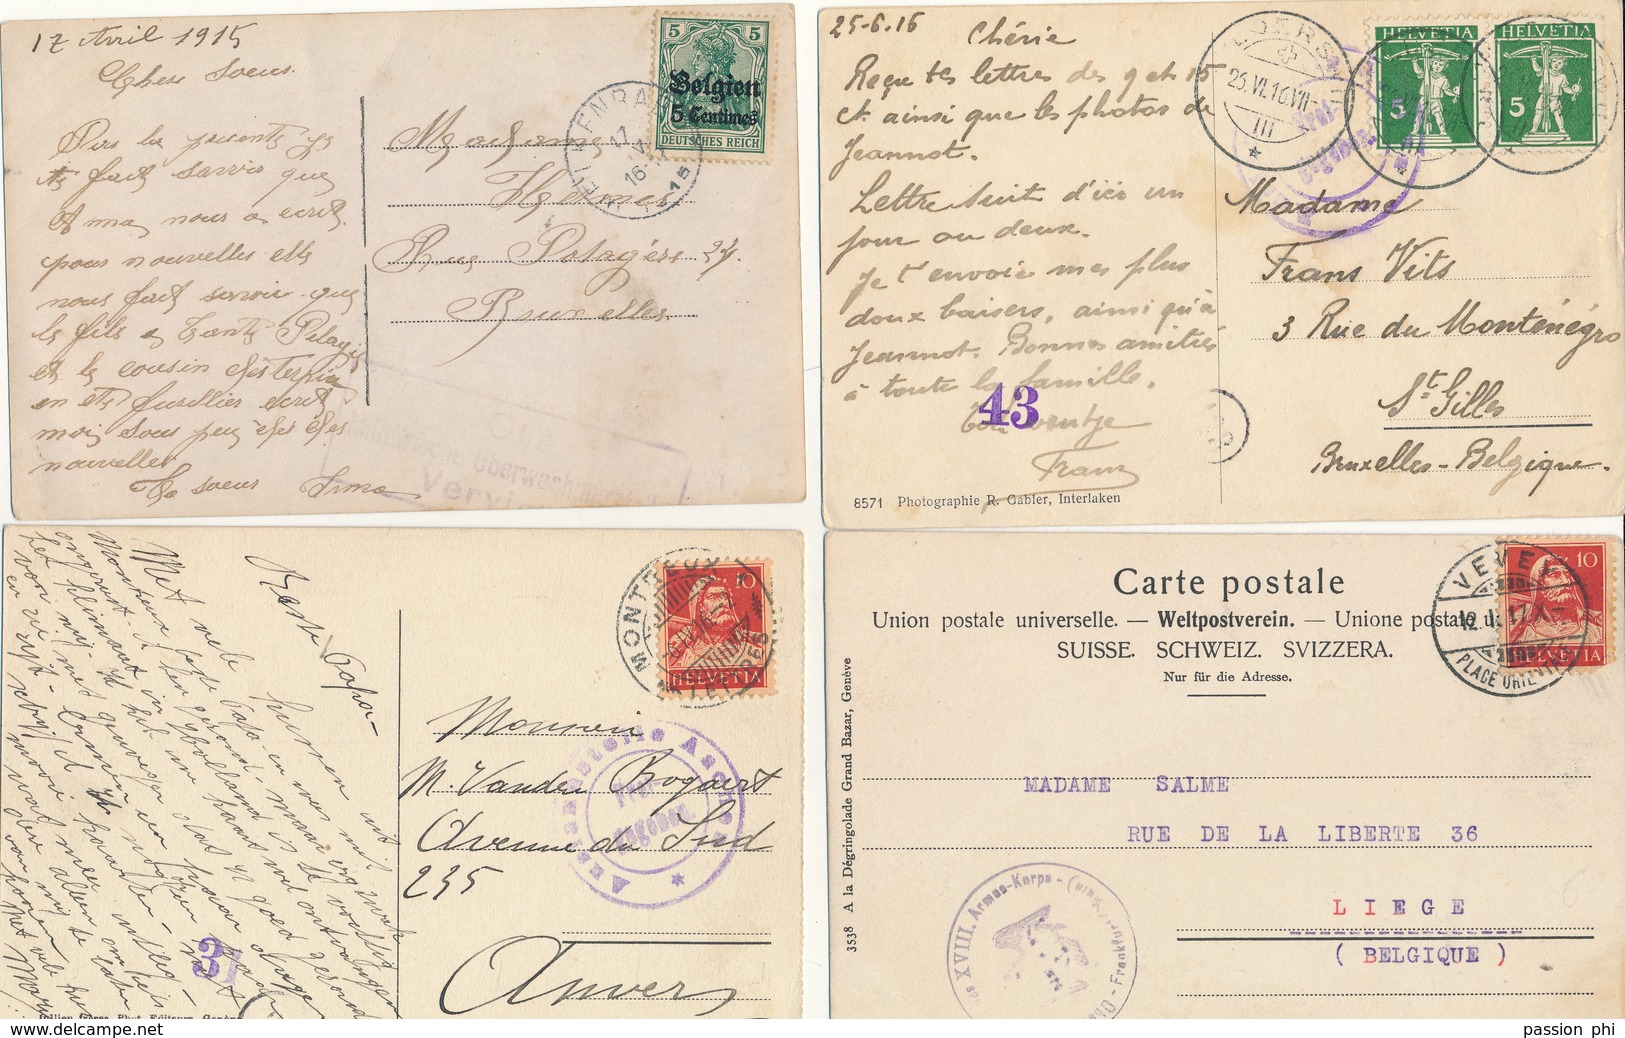 BELGIUM WWI GERMAN OCCUPATION NICE SELECTION OF COVERS ( X 90)